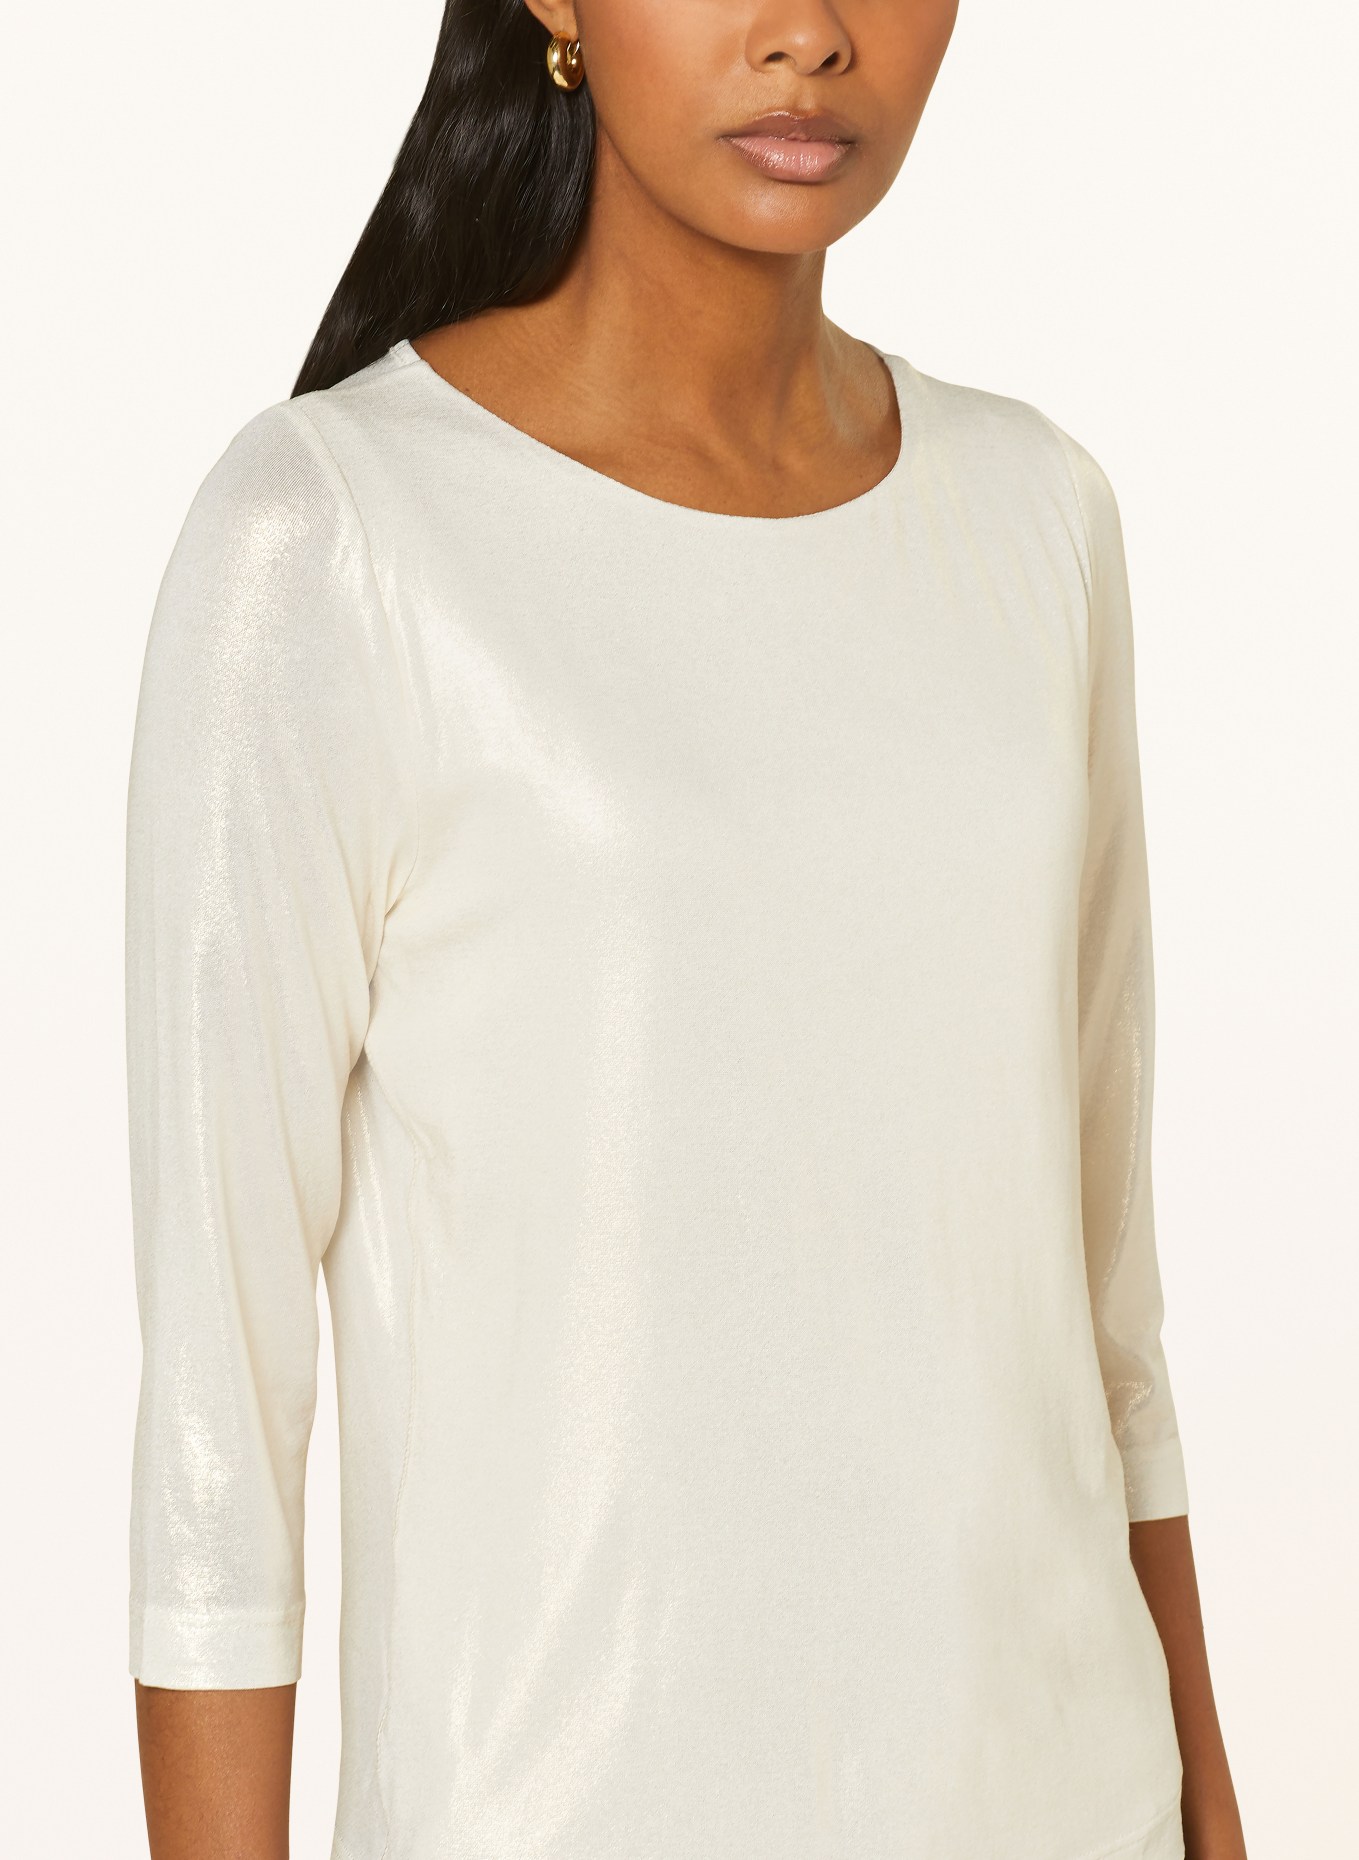 lilienfels Shirt with 3/4 sleeves, Color: ECRU (Image 4)